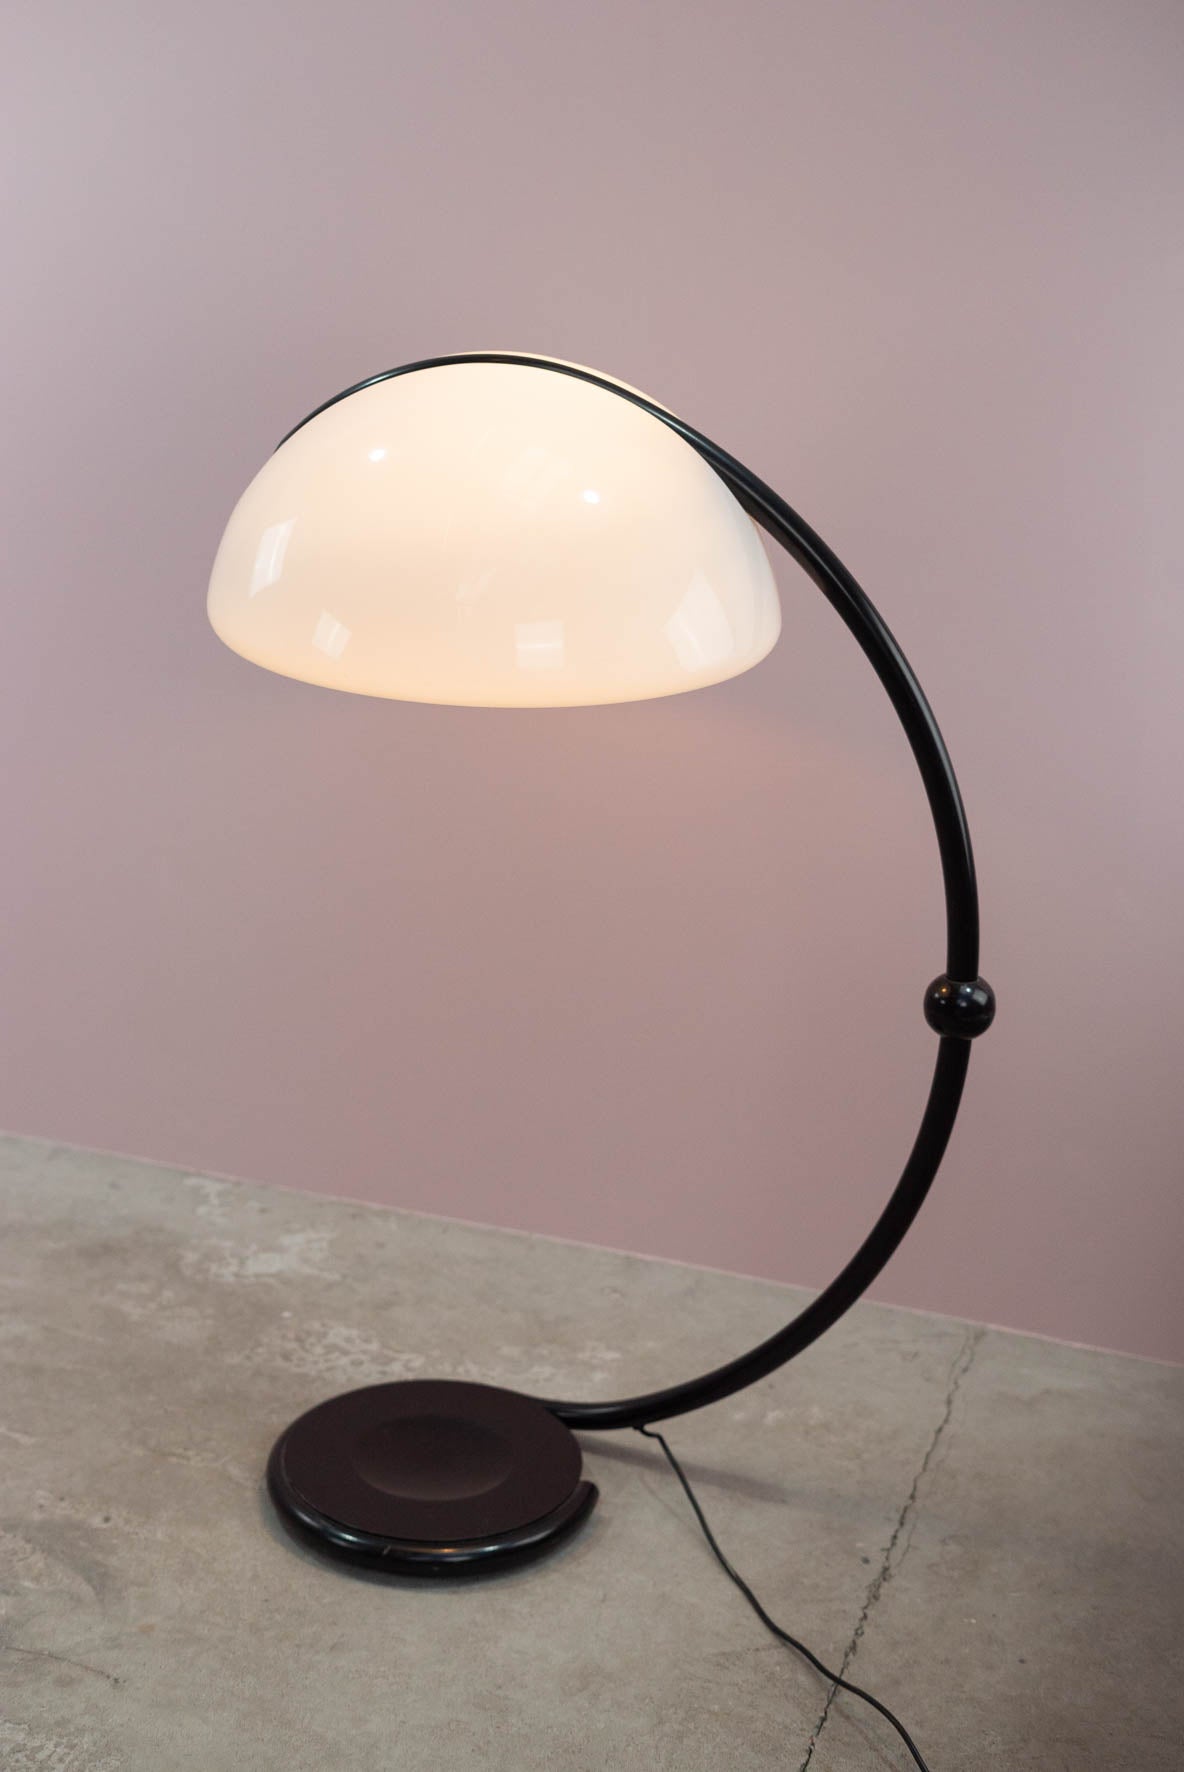 Serpente floor lamp model 2131 by Elio Martinelli for Martinelli Luce